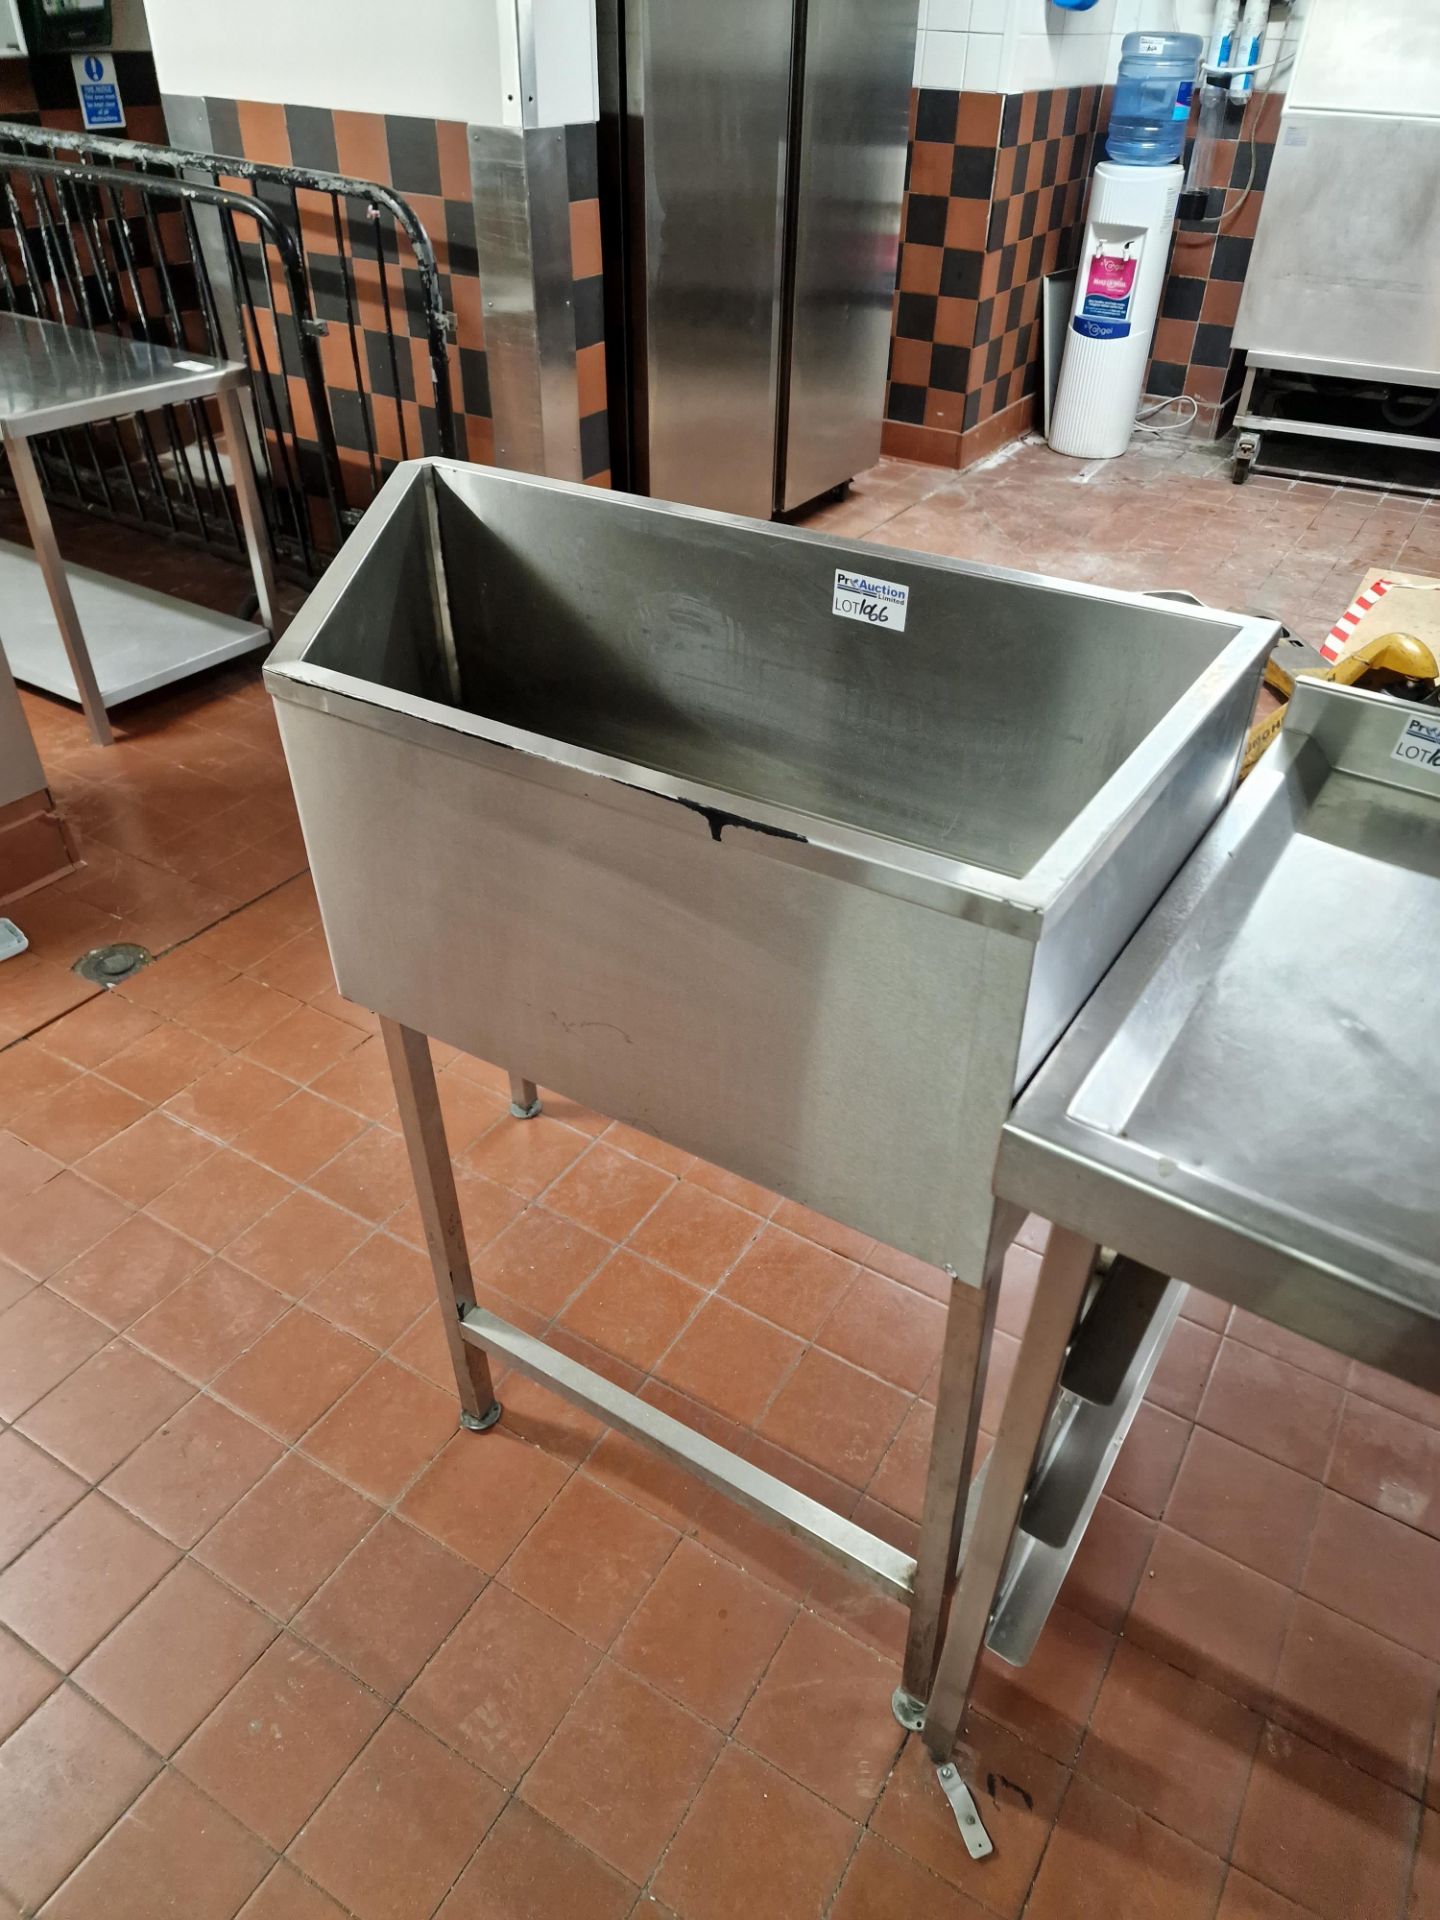 Stainless Steel Insulated Bath With Drain 92 x 53 x 108cm